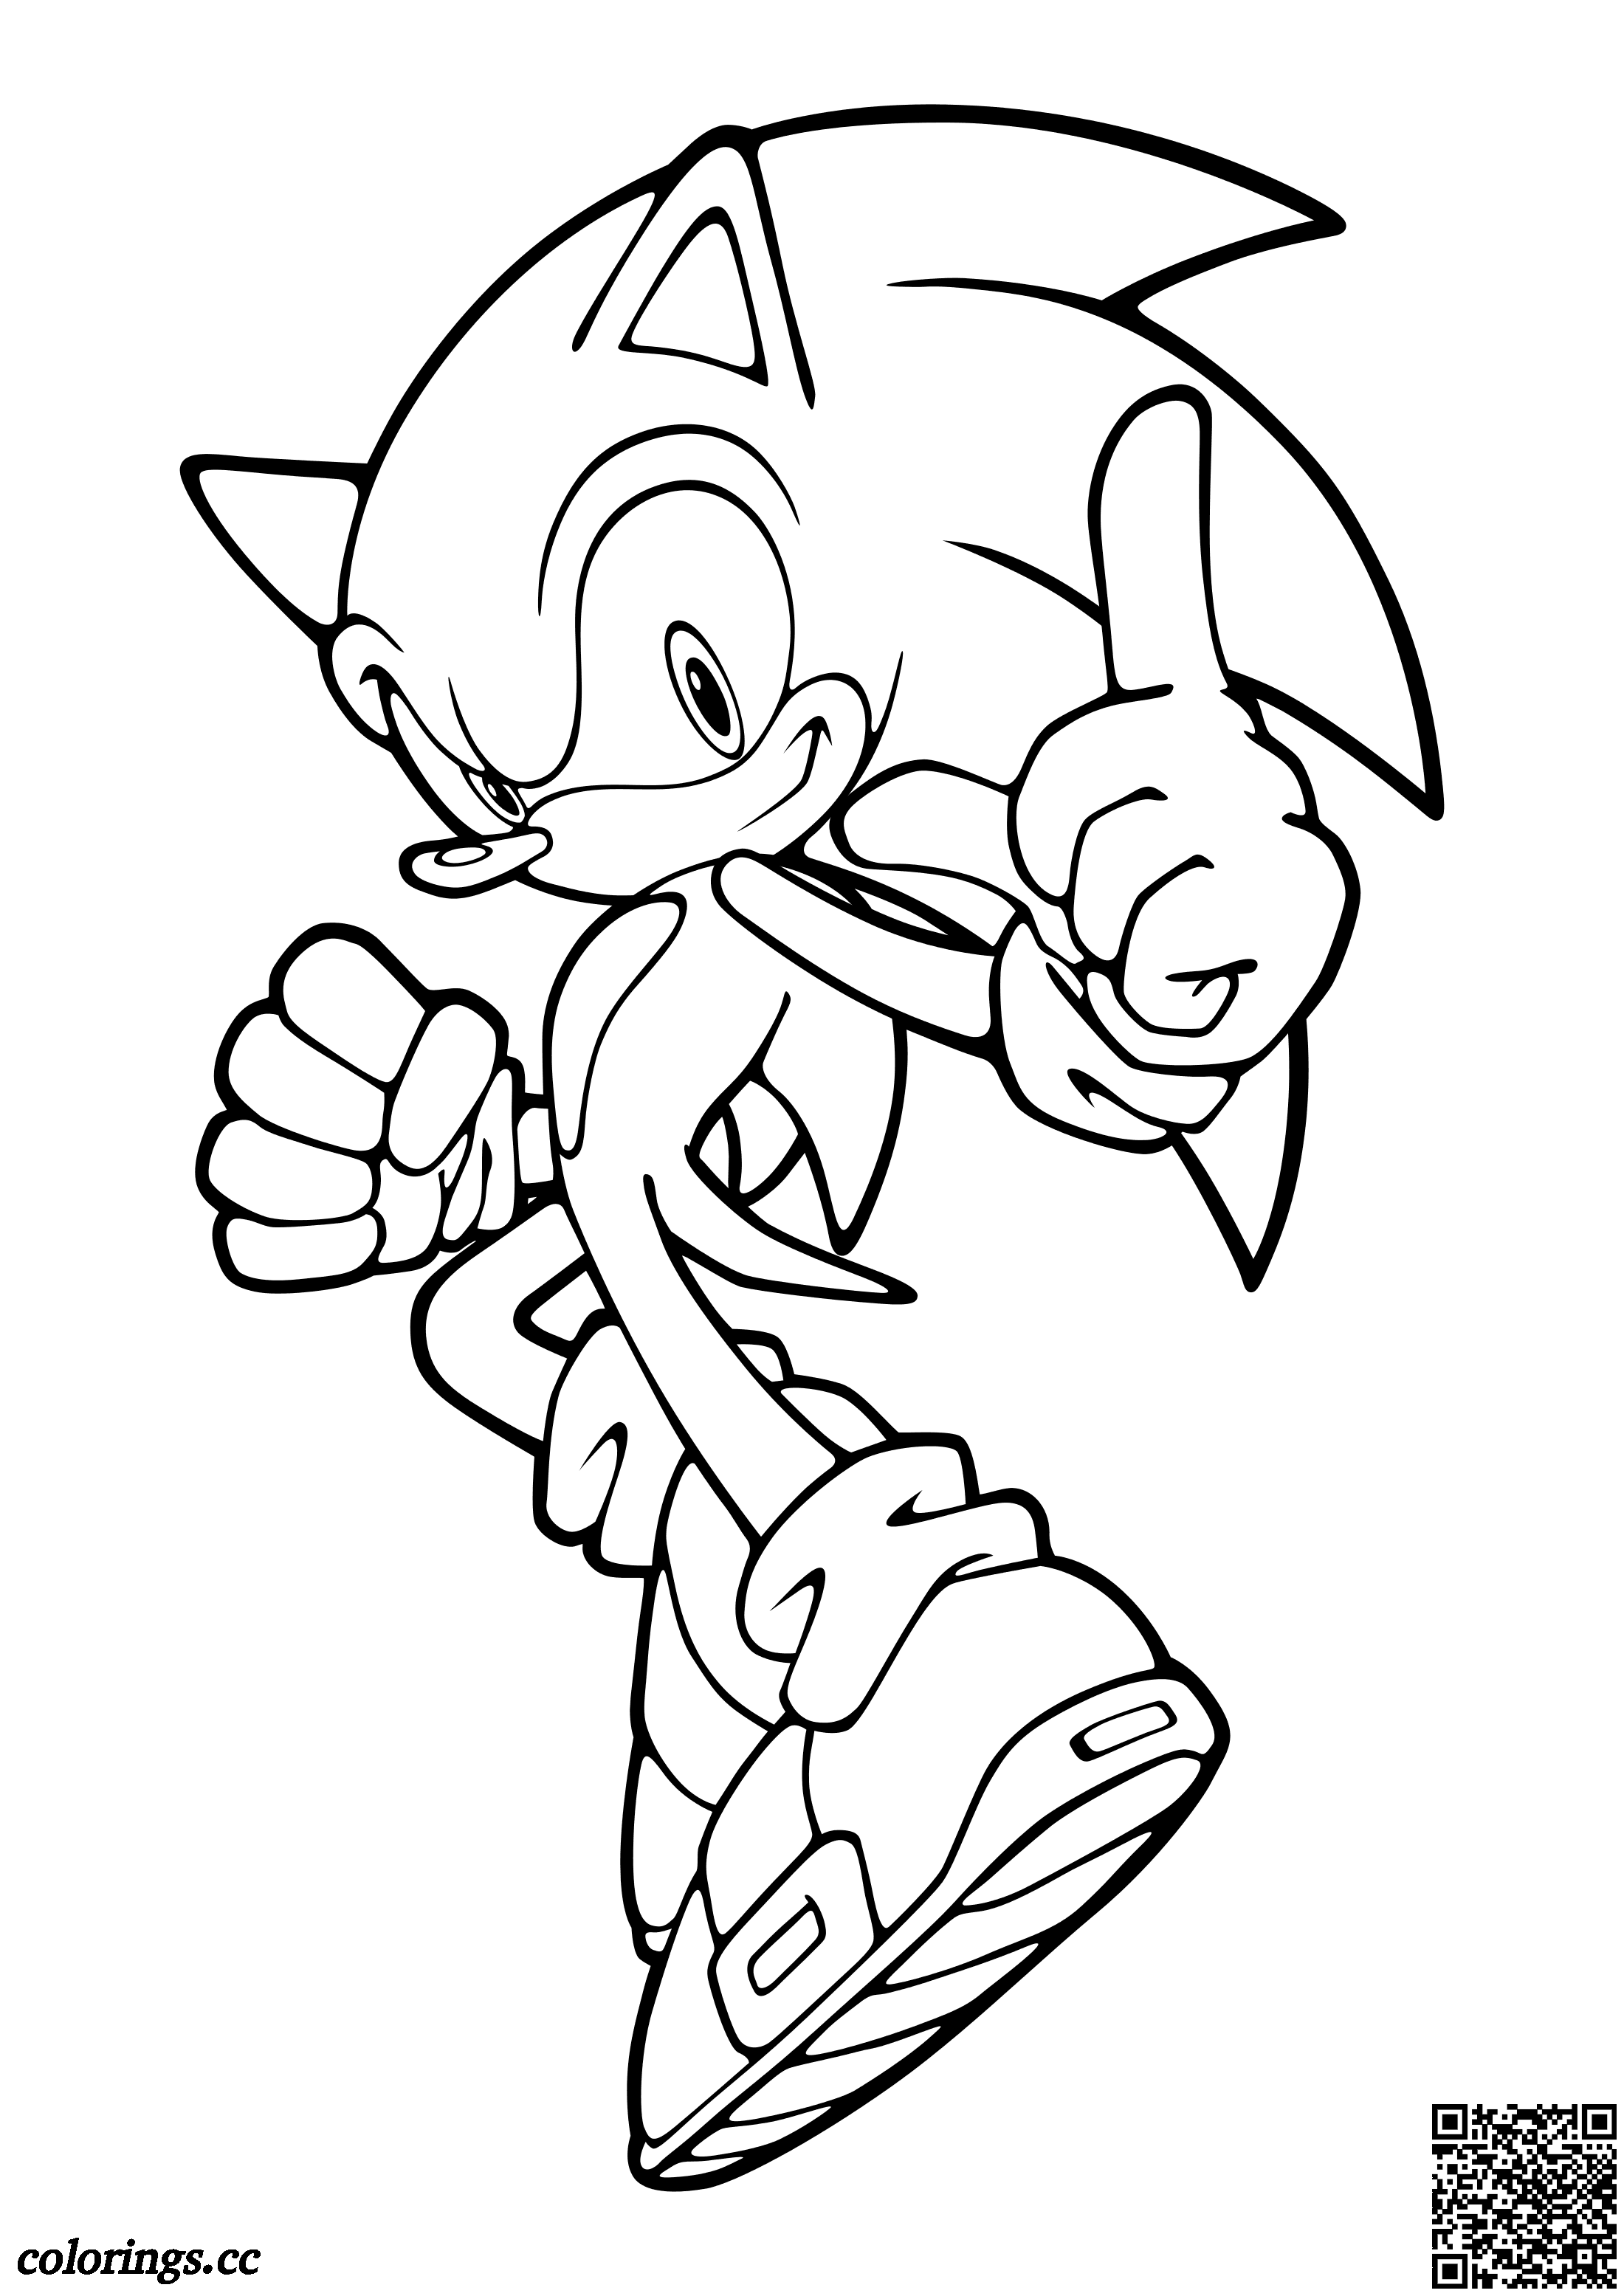 Fast Sonic the Hedgehog coloring pages, Sonic the Hedgehog ...